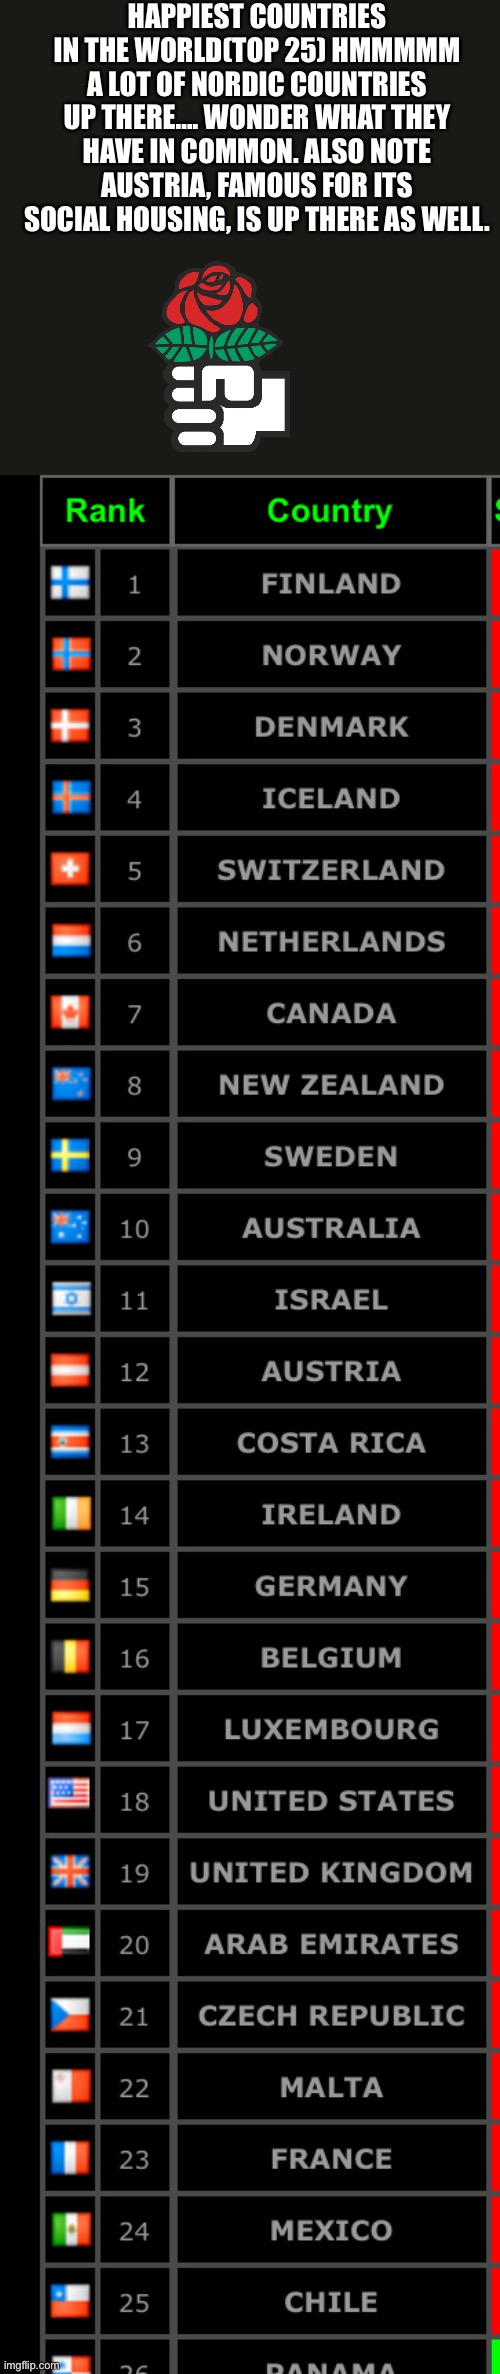 HAPPIEST COUNTRIES IN THE WORLD(TOP 25) HMMMMM A LOT OF NORDIC COUNTRIES UP THERE…. WONDER WHAT THEY HAVE IN COMMON. ALSO NOTE AUSTRIA, FAMOUS FOR ITS SOCIAL HOUSING, IS UP THERE AS WELL. | made w/ Imgflip meme maker